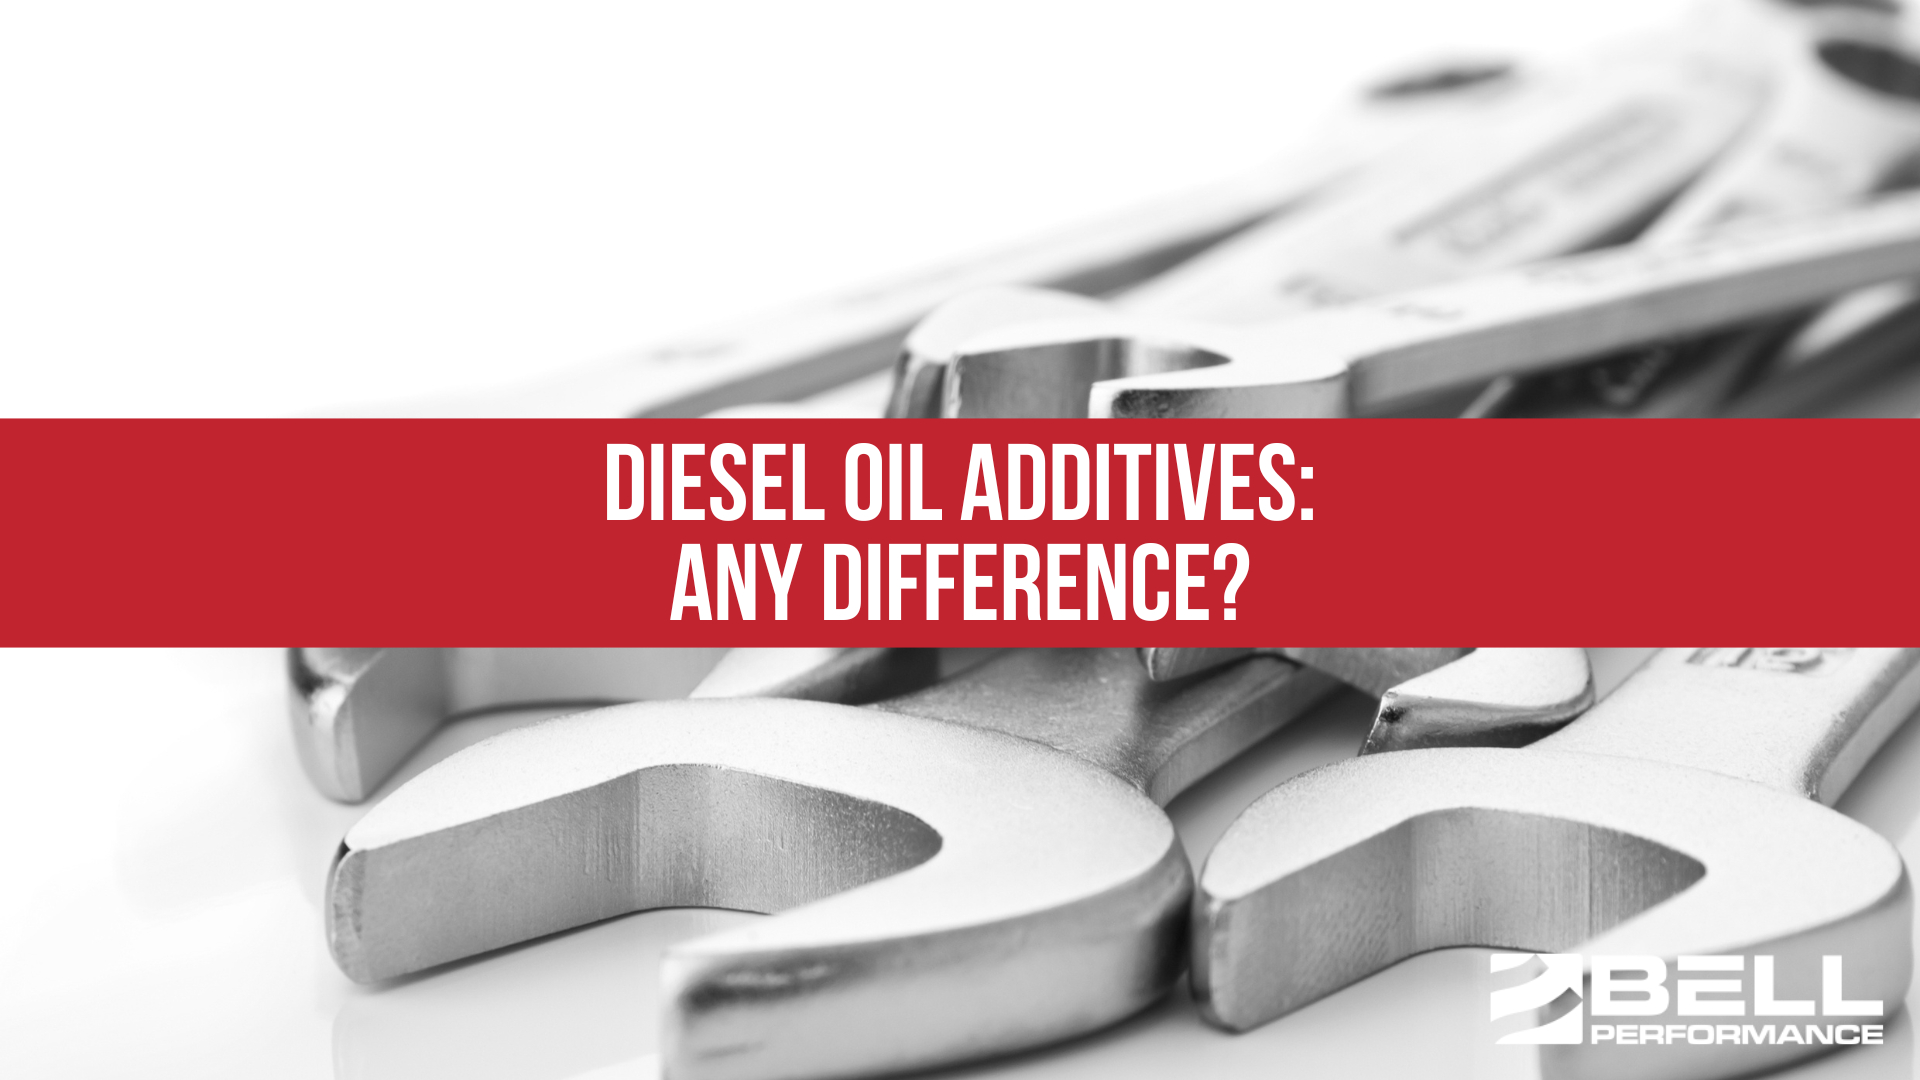 Diesel Oil Additives: Any Difference?